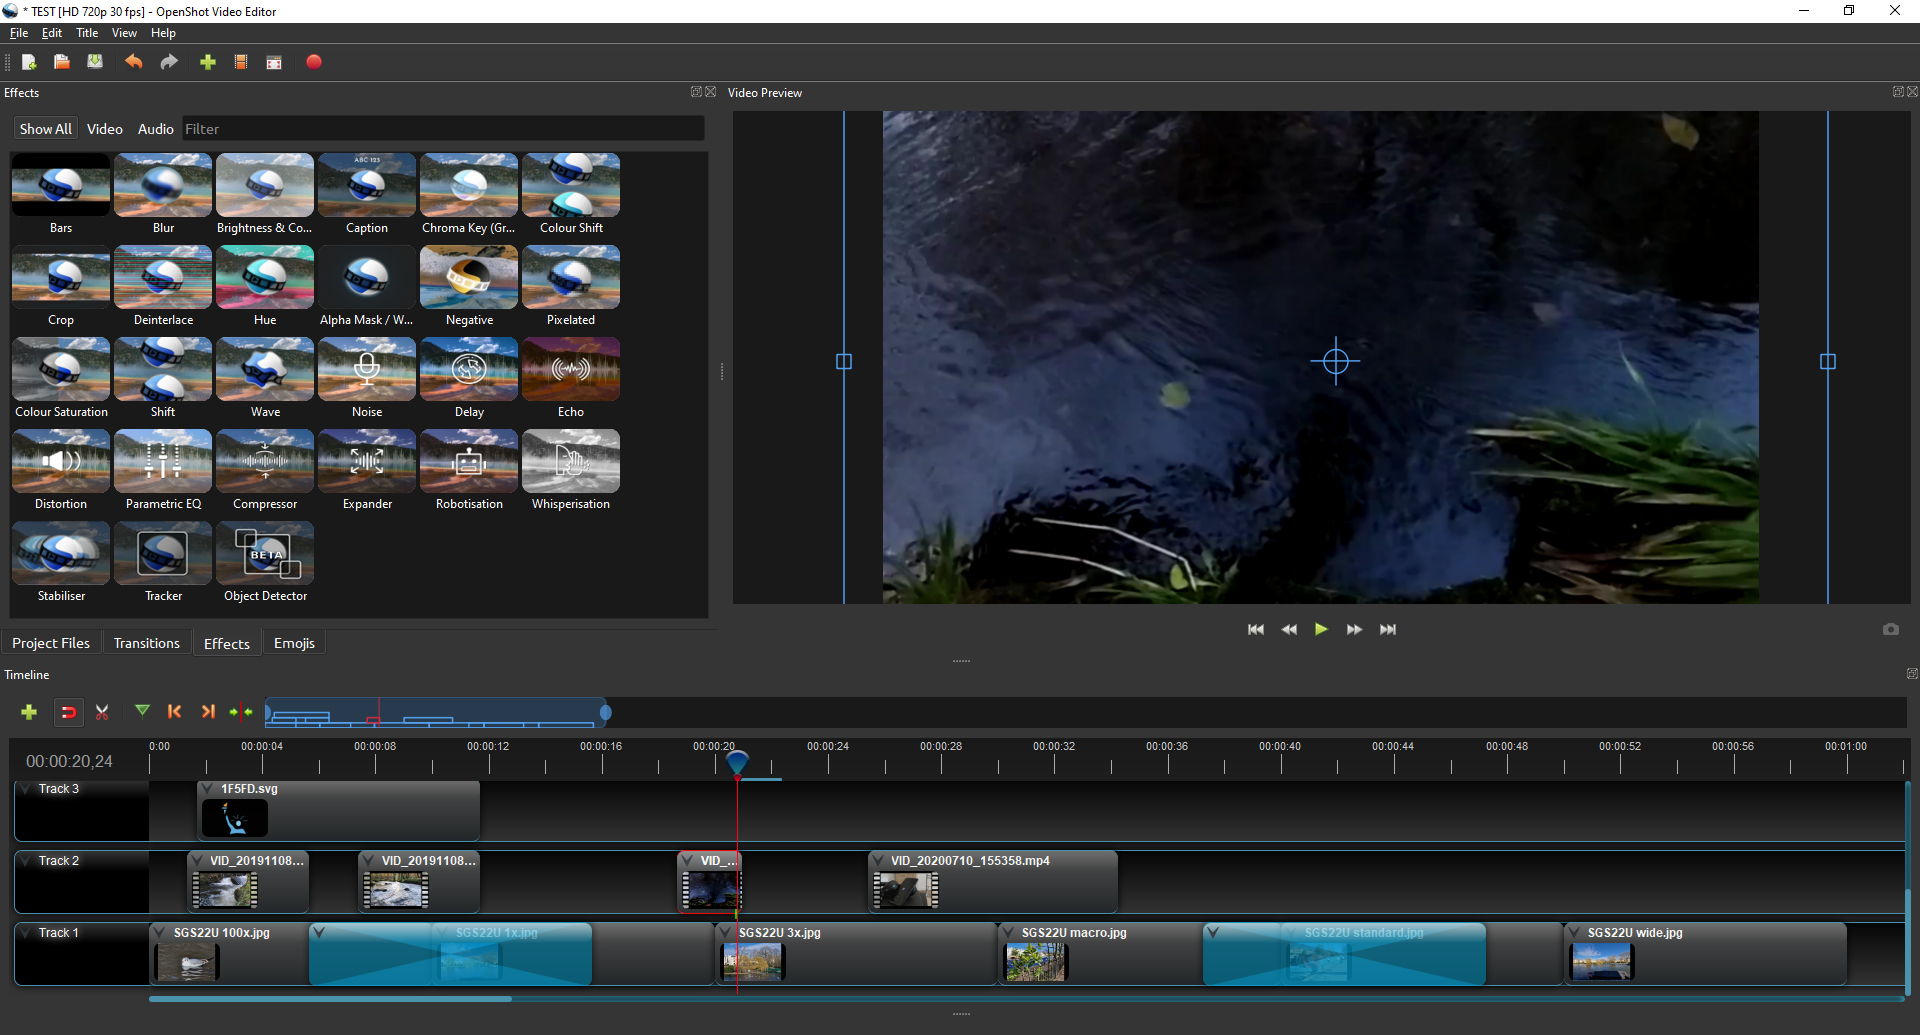 Interface of OpenShot, one of the best video editing software tools